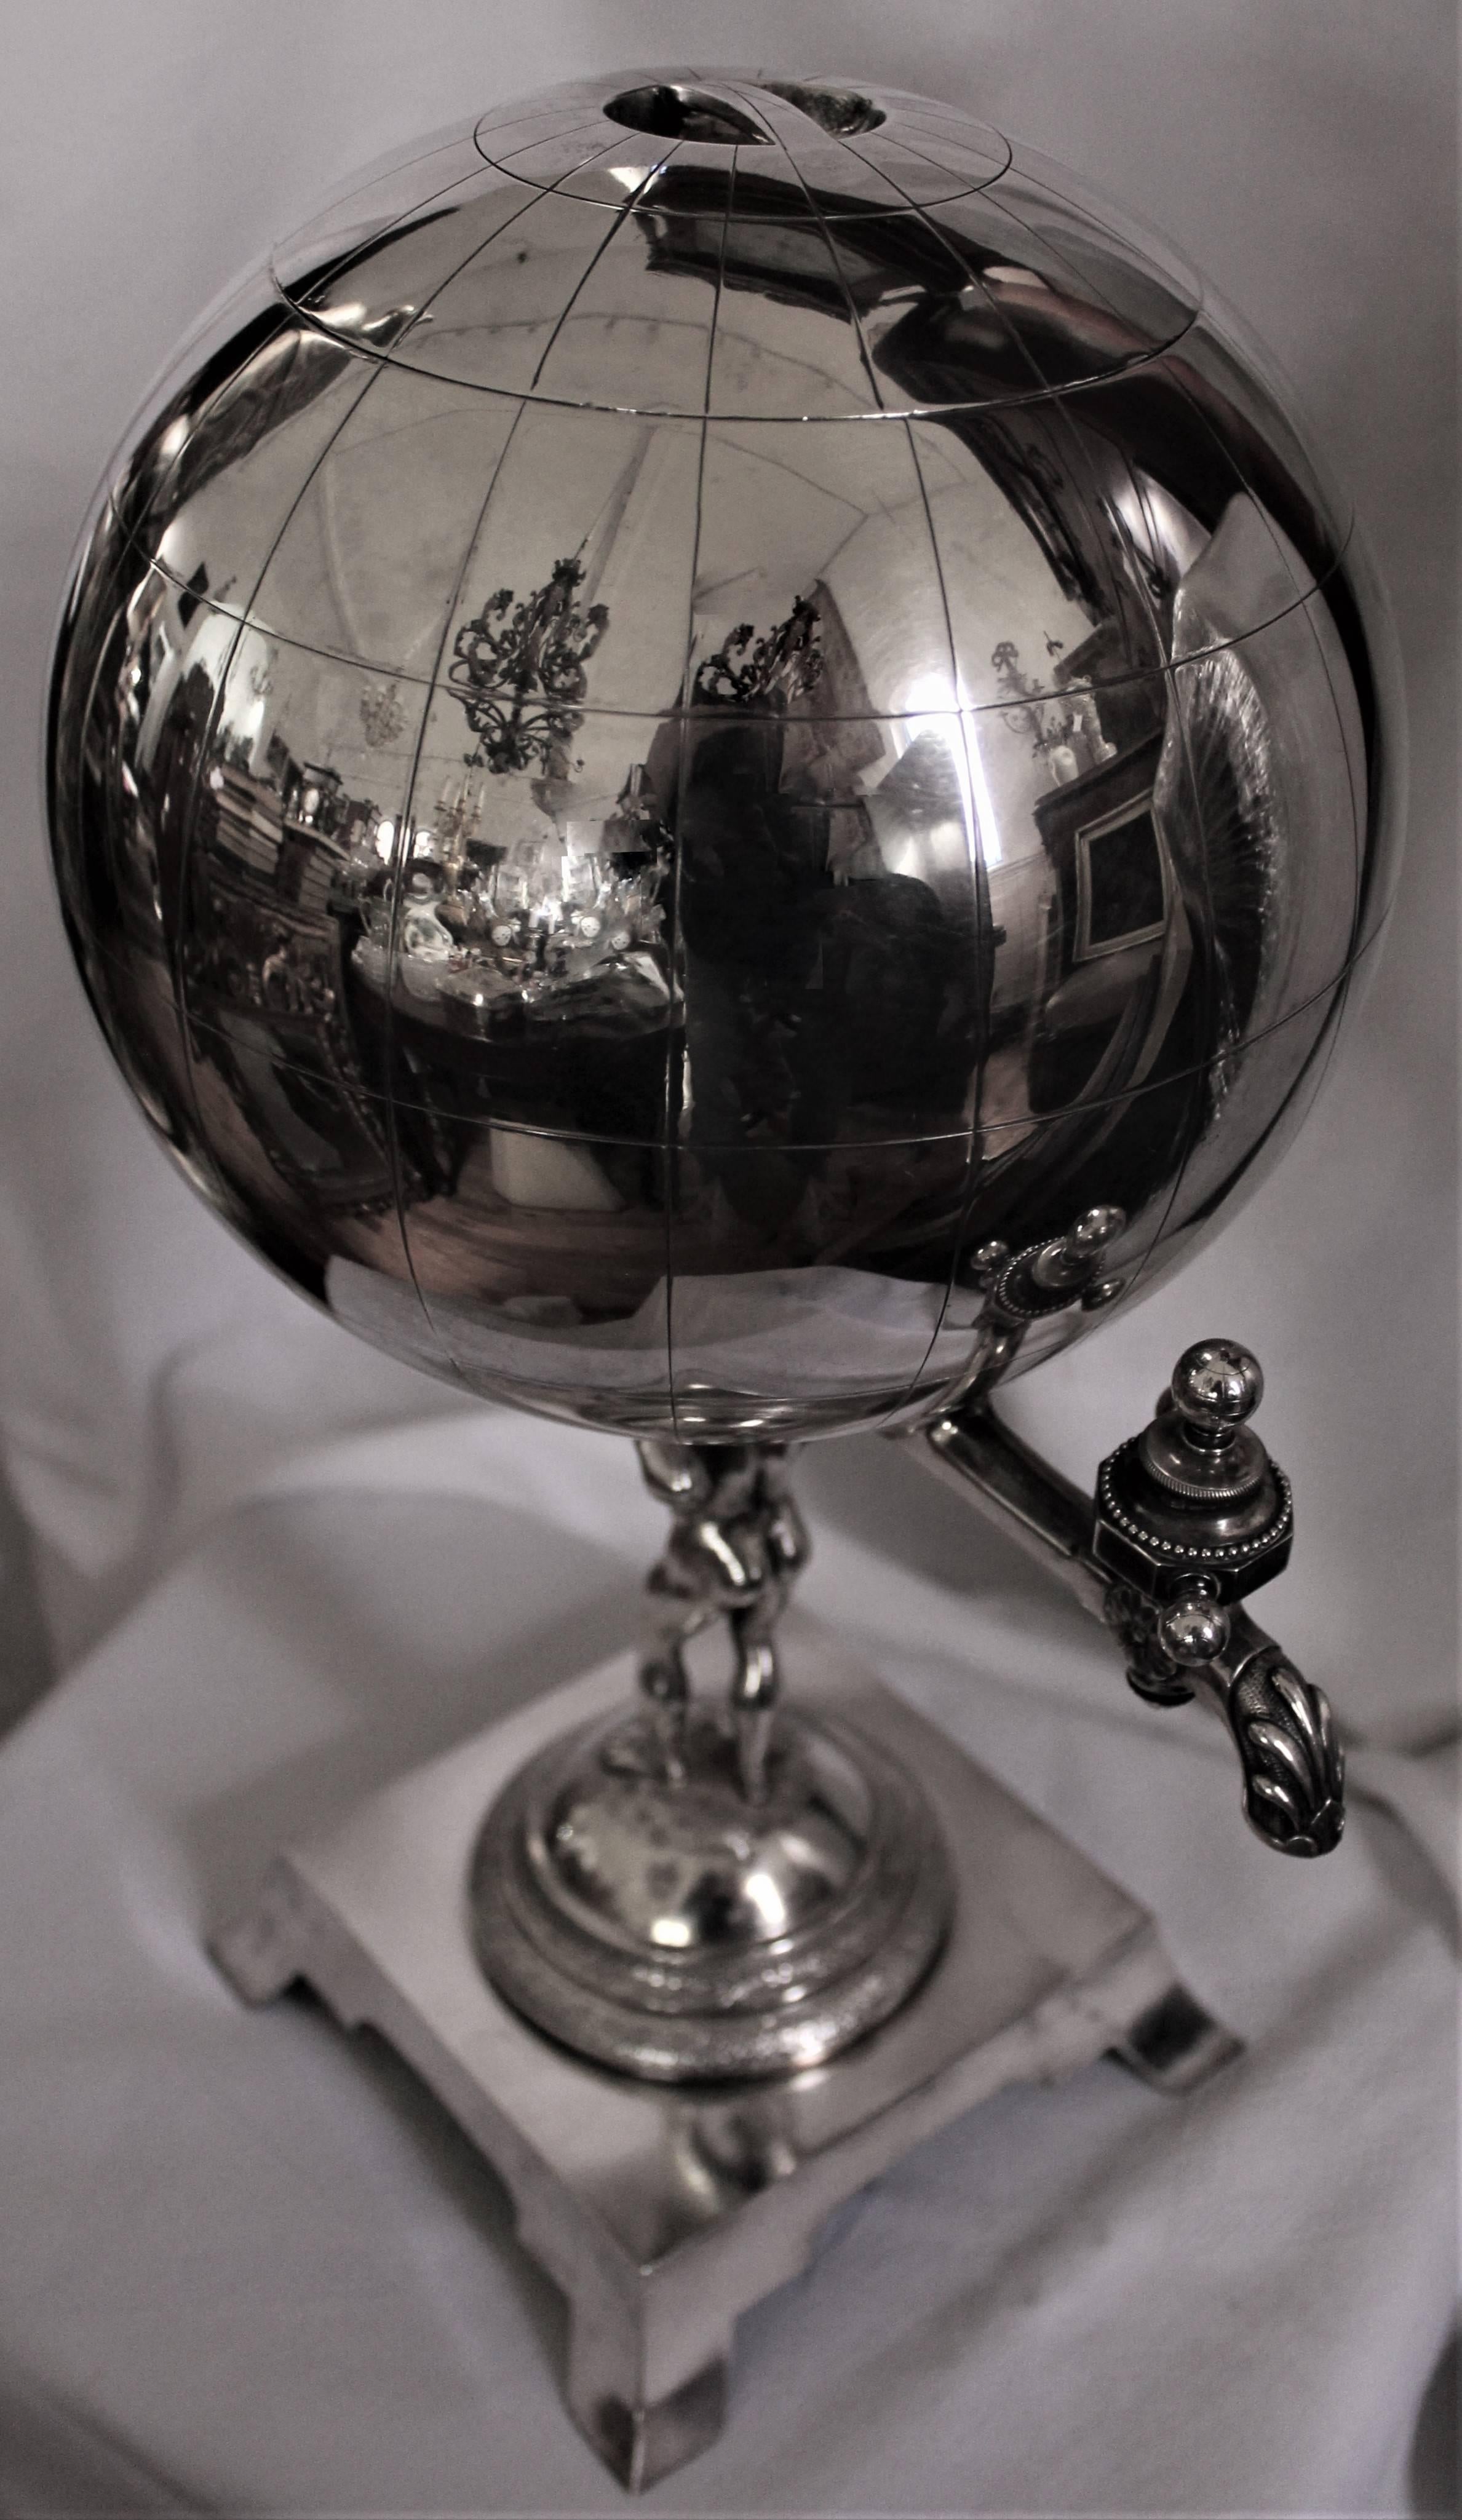 19th century Gorham sterling silver figural tea urn. It's Atlas (or Hercules) holding the world. 64 Ounces made in America Hallmark 1873. Lid is 5 inches round. 10 inches to the spigot. Globe is 8 inches round. Base is 6 inches square. Engraved